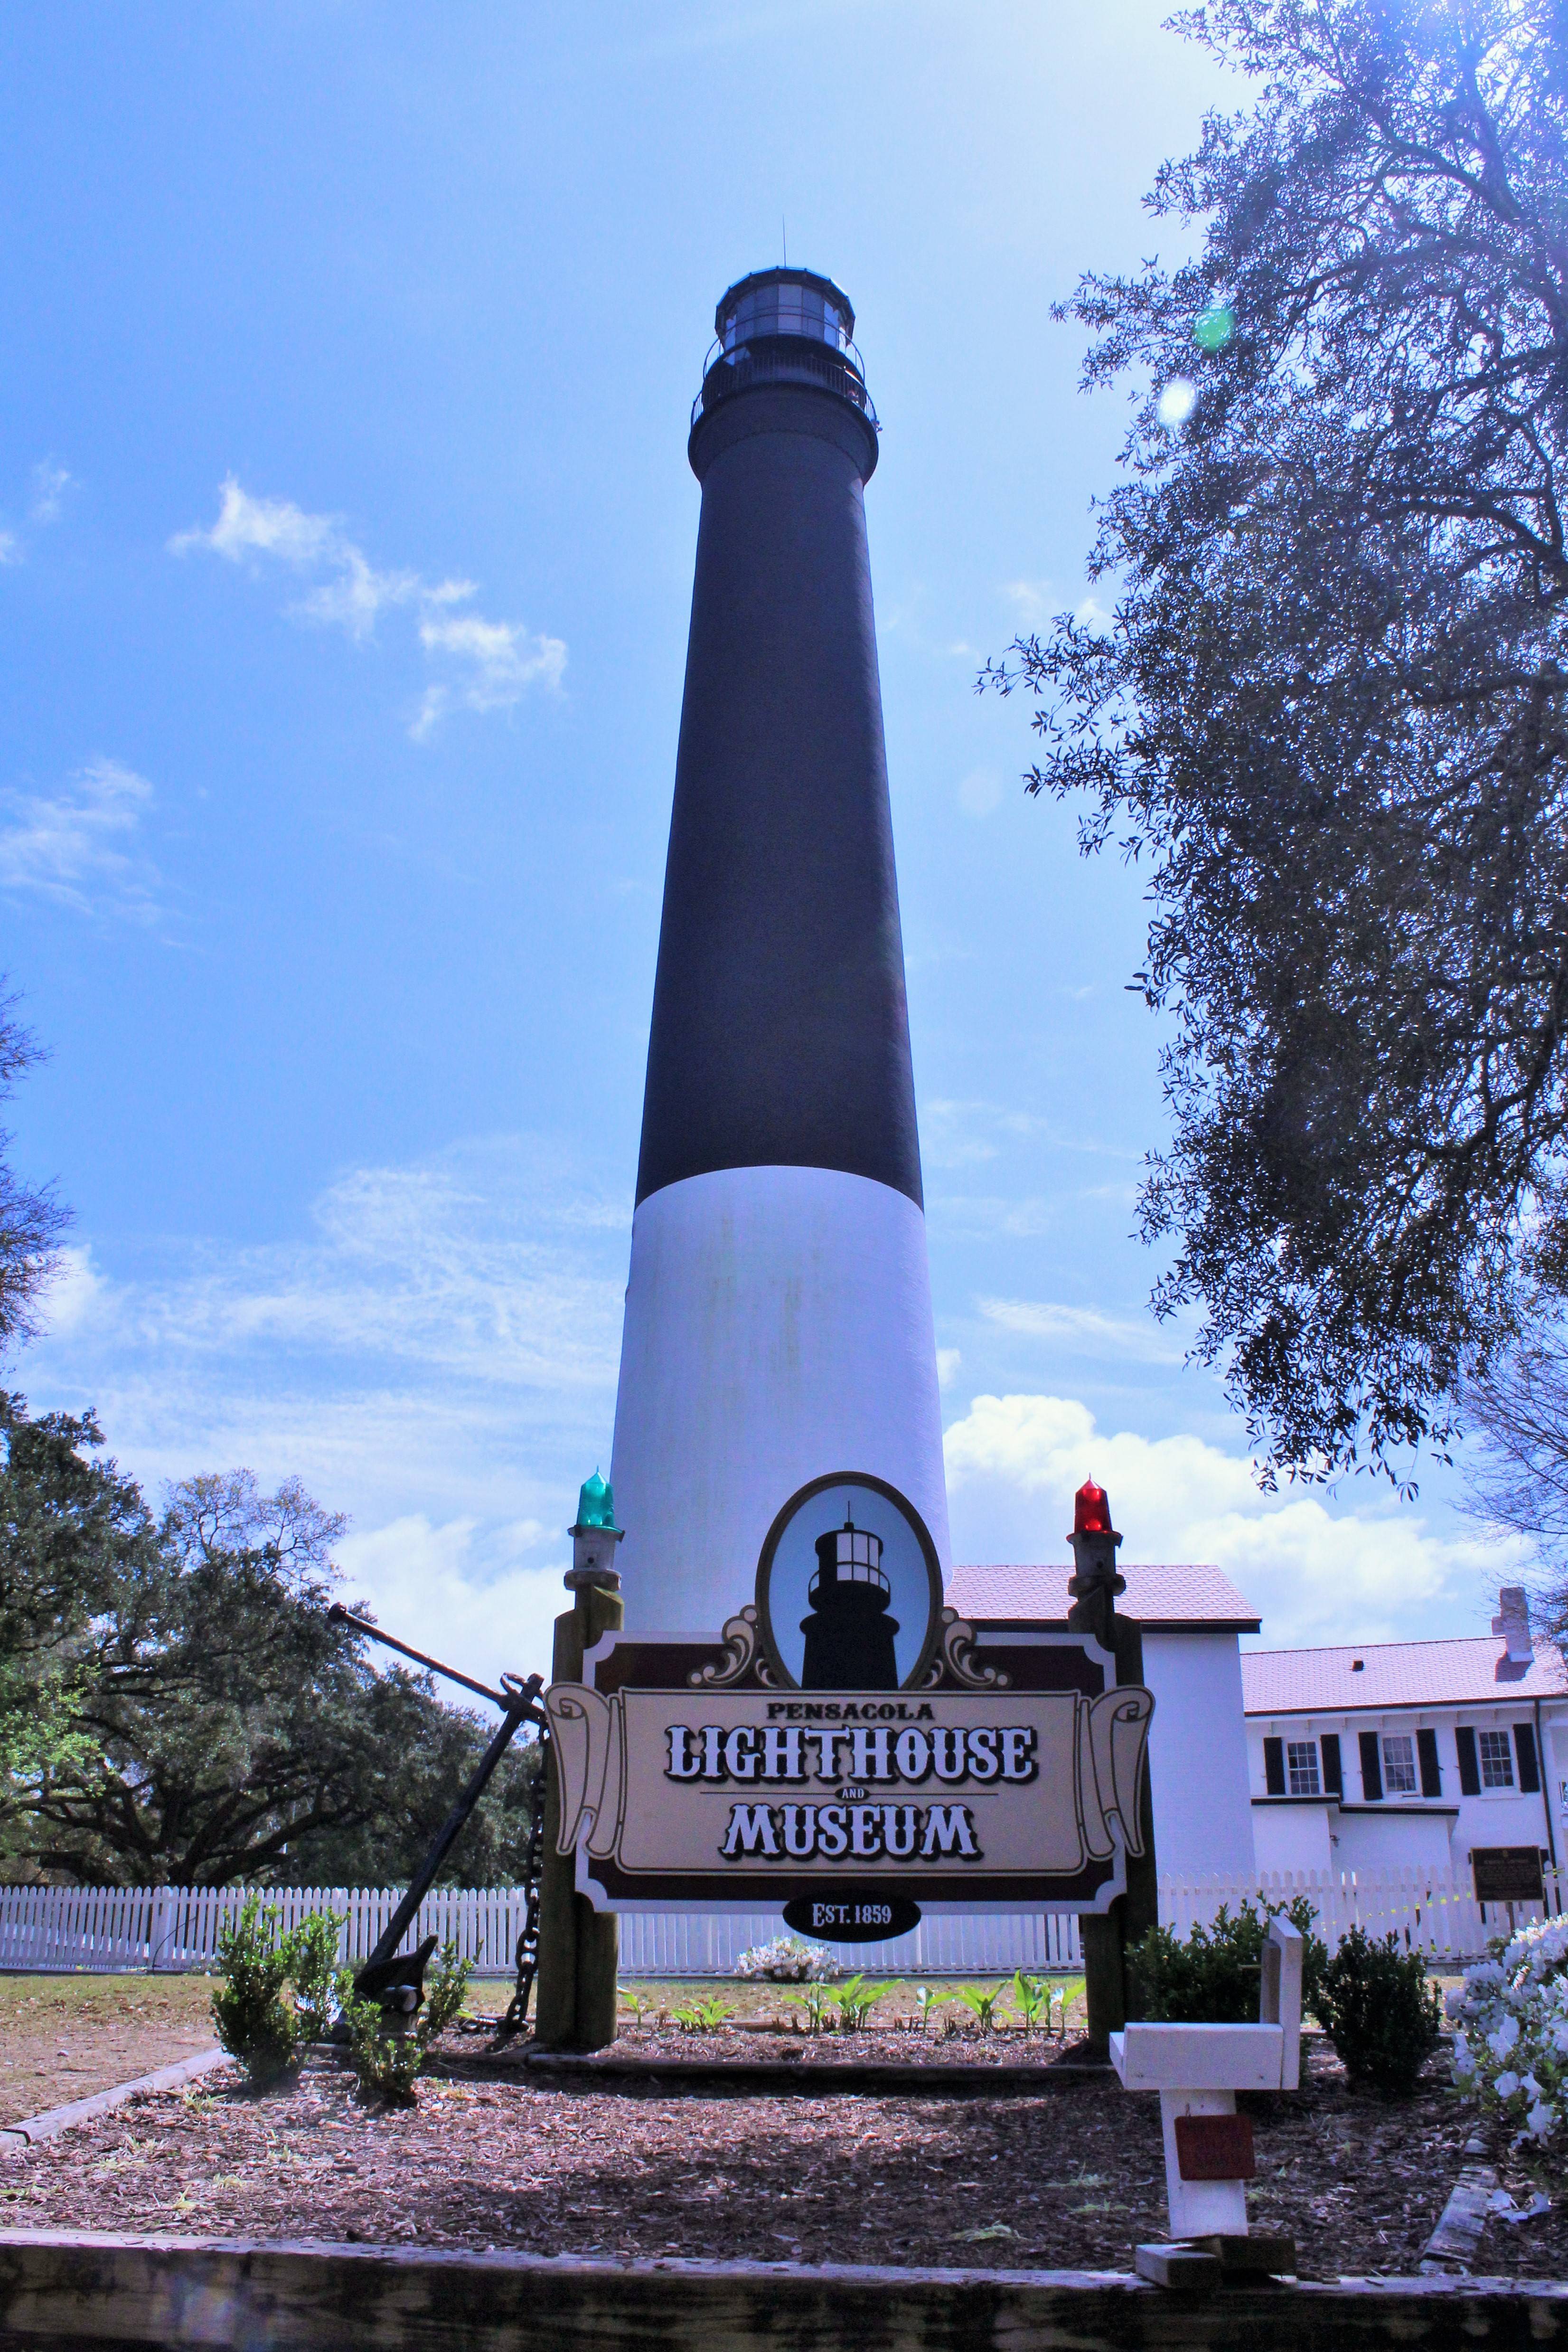 The Pensacola Lighthouse and Mariner's Museum